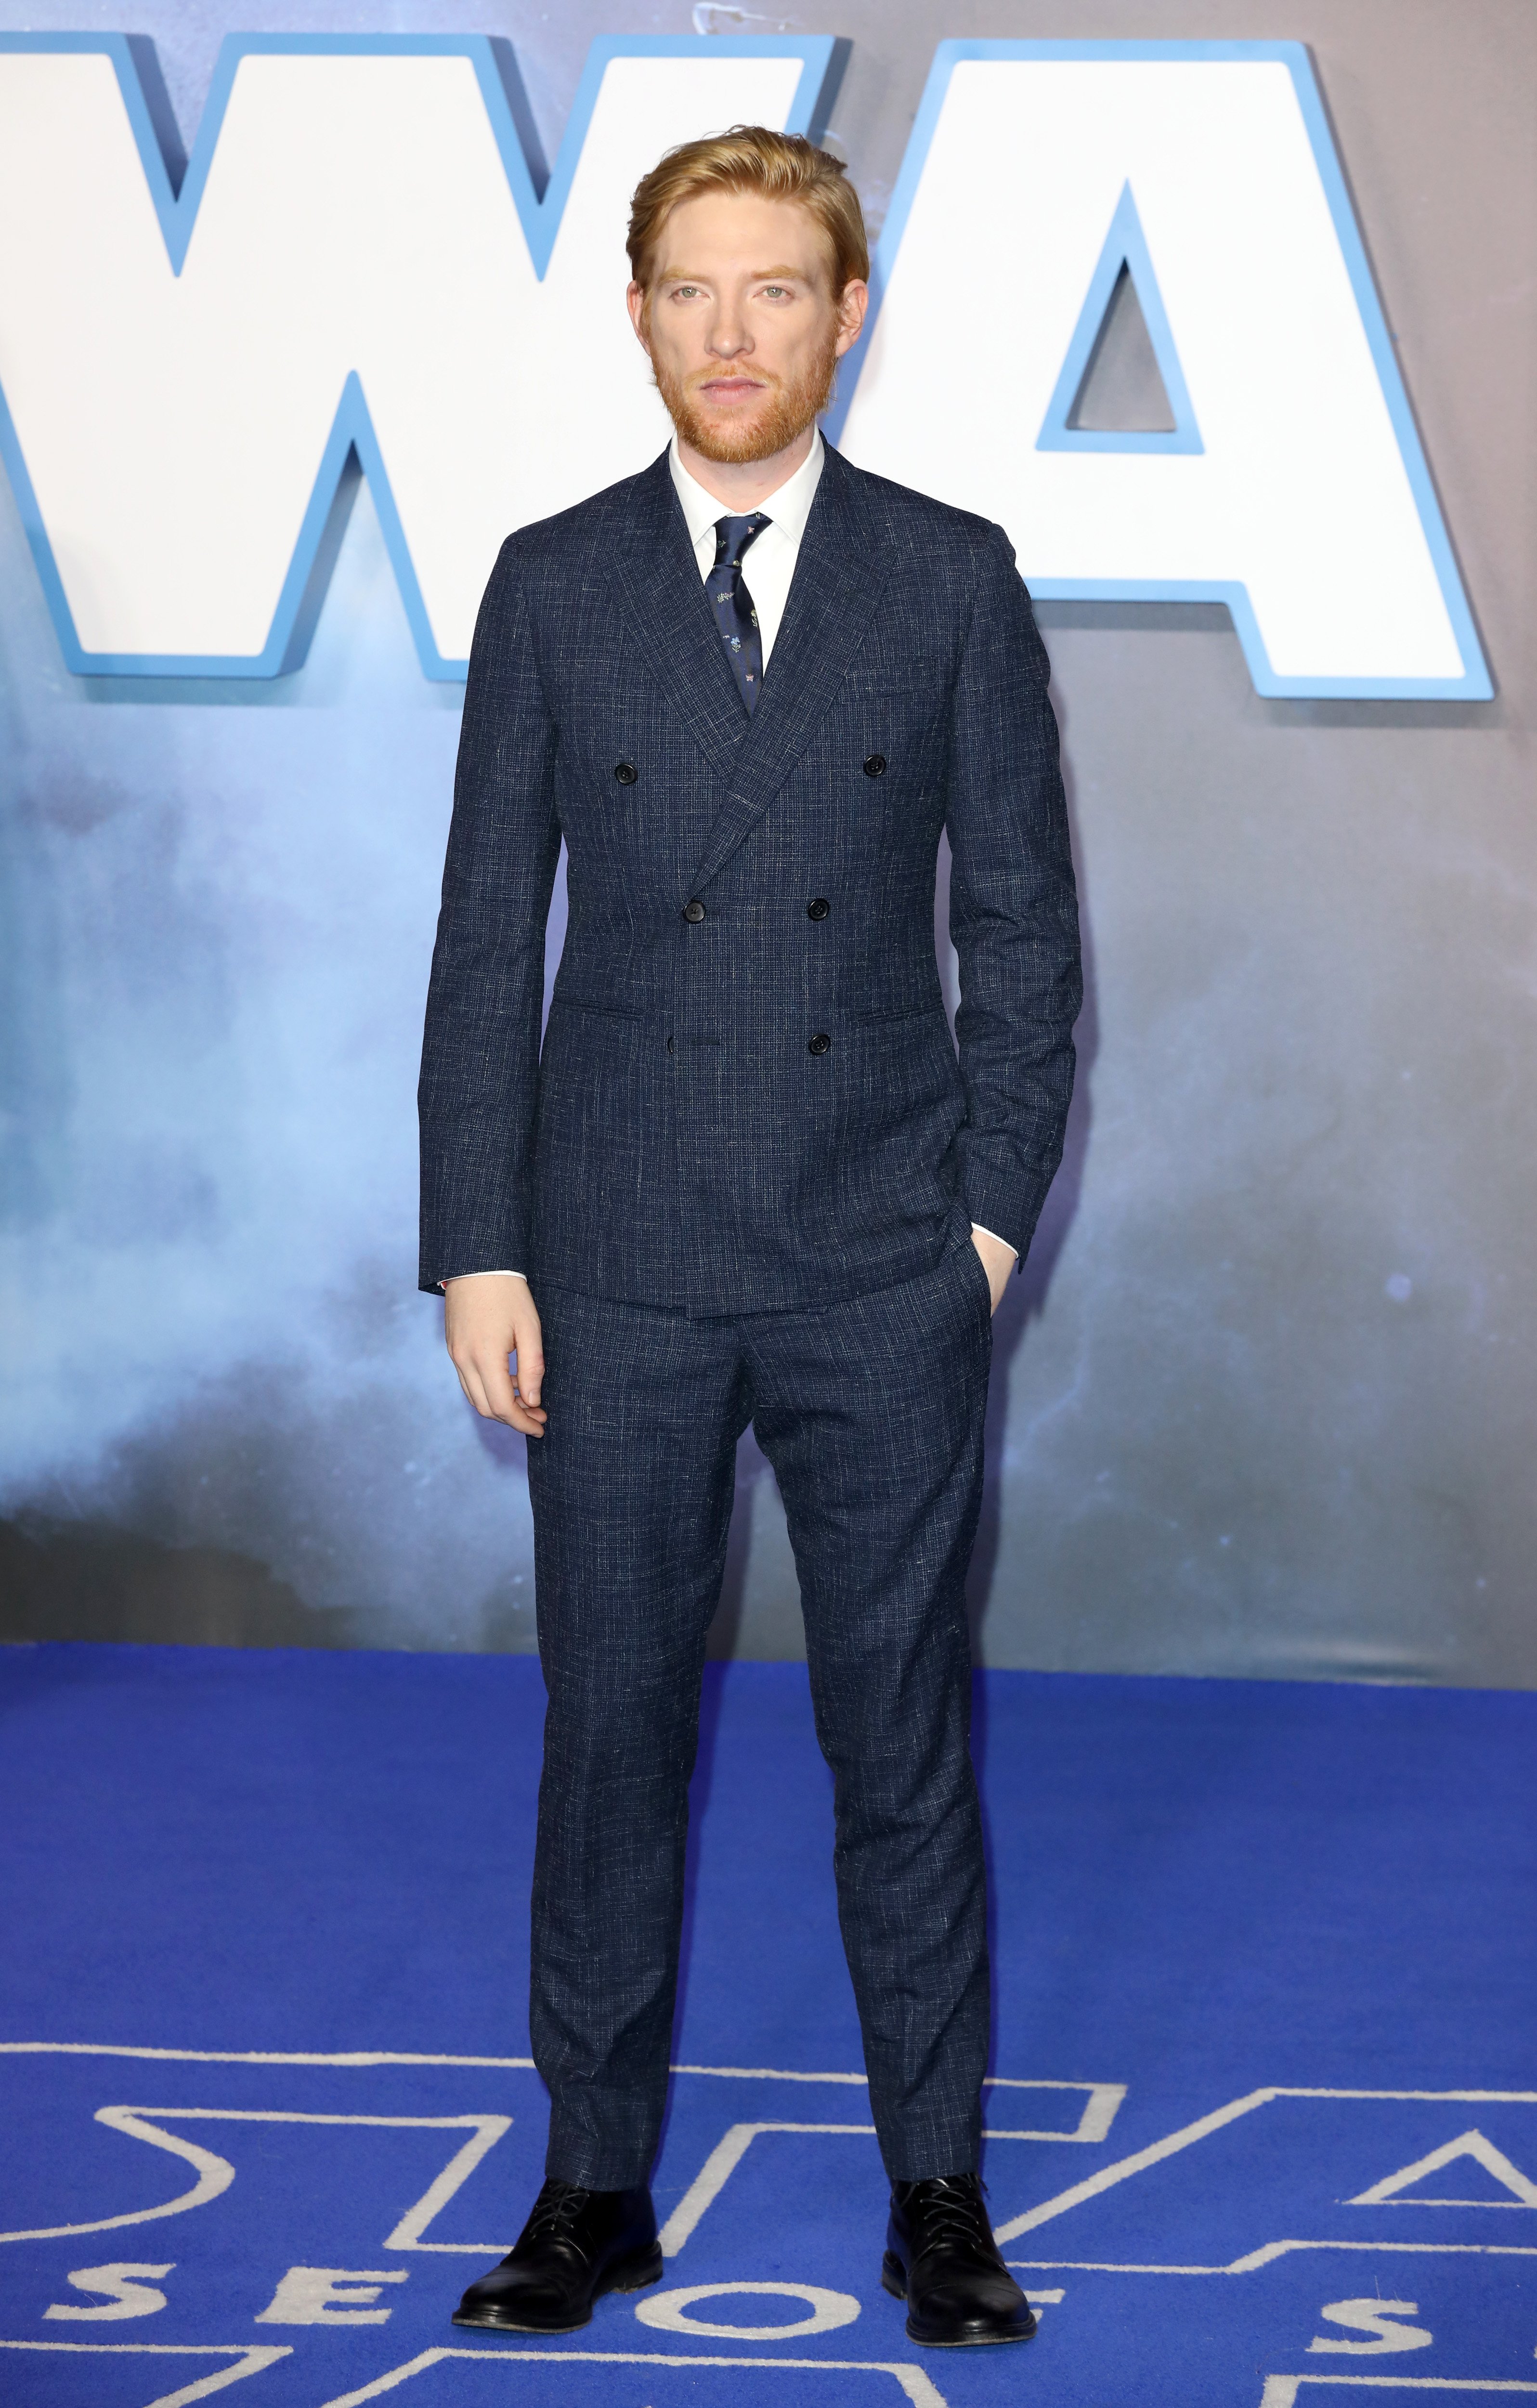 Domhnall Gleeson at the European premiere of "Star Wars: The Rise of Skywalker" on December 18, 2019, in London | Source: Getty Images